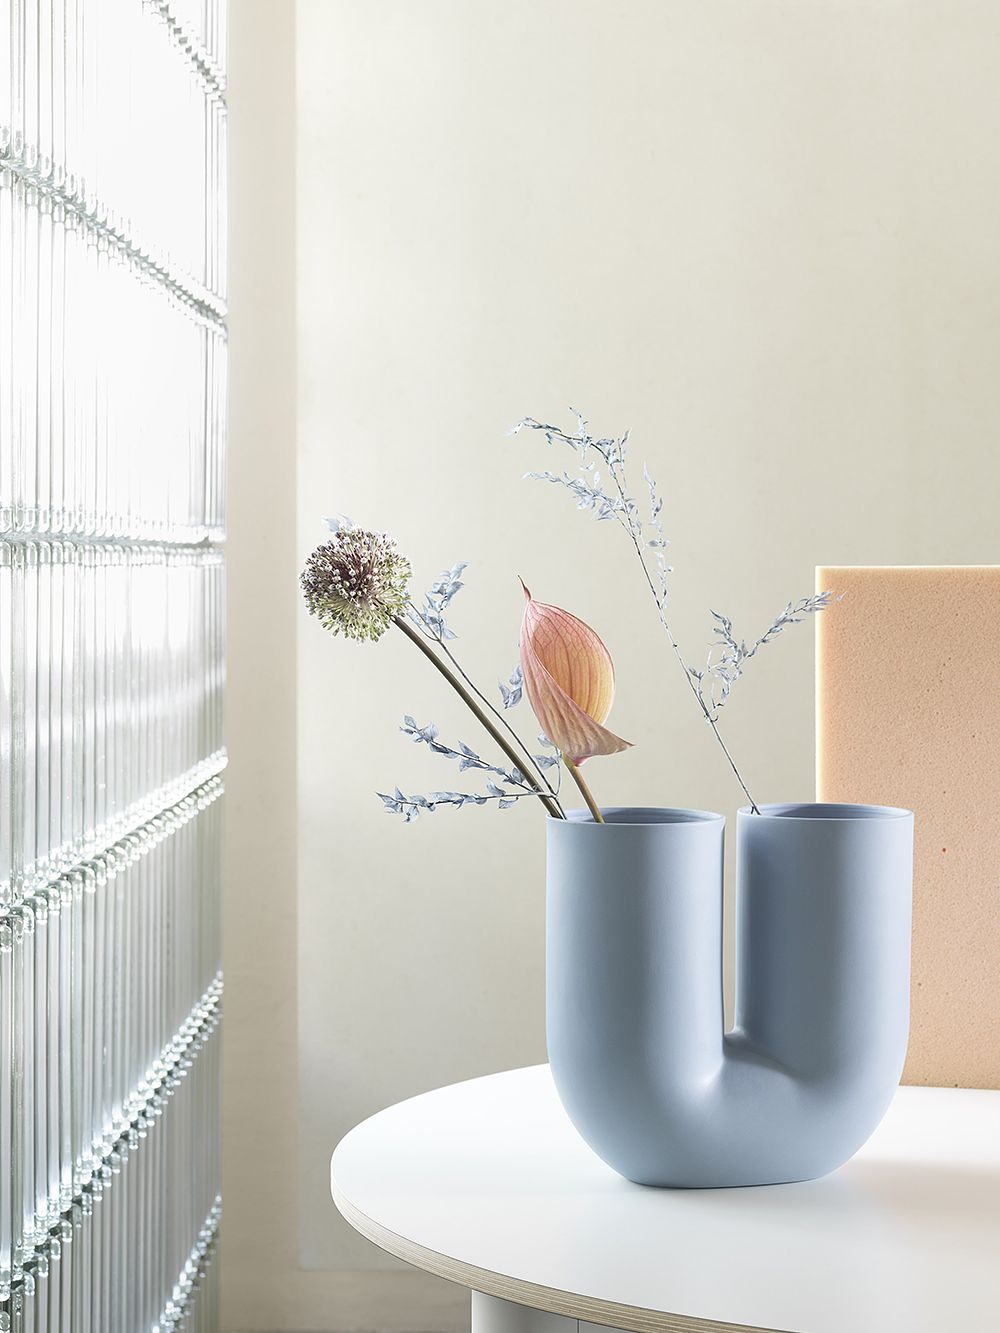 Muuto's light blue Kink vase filled with a few flowers.